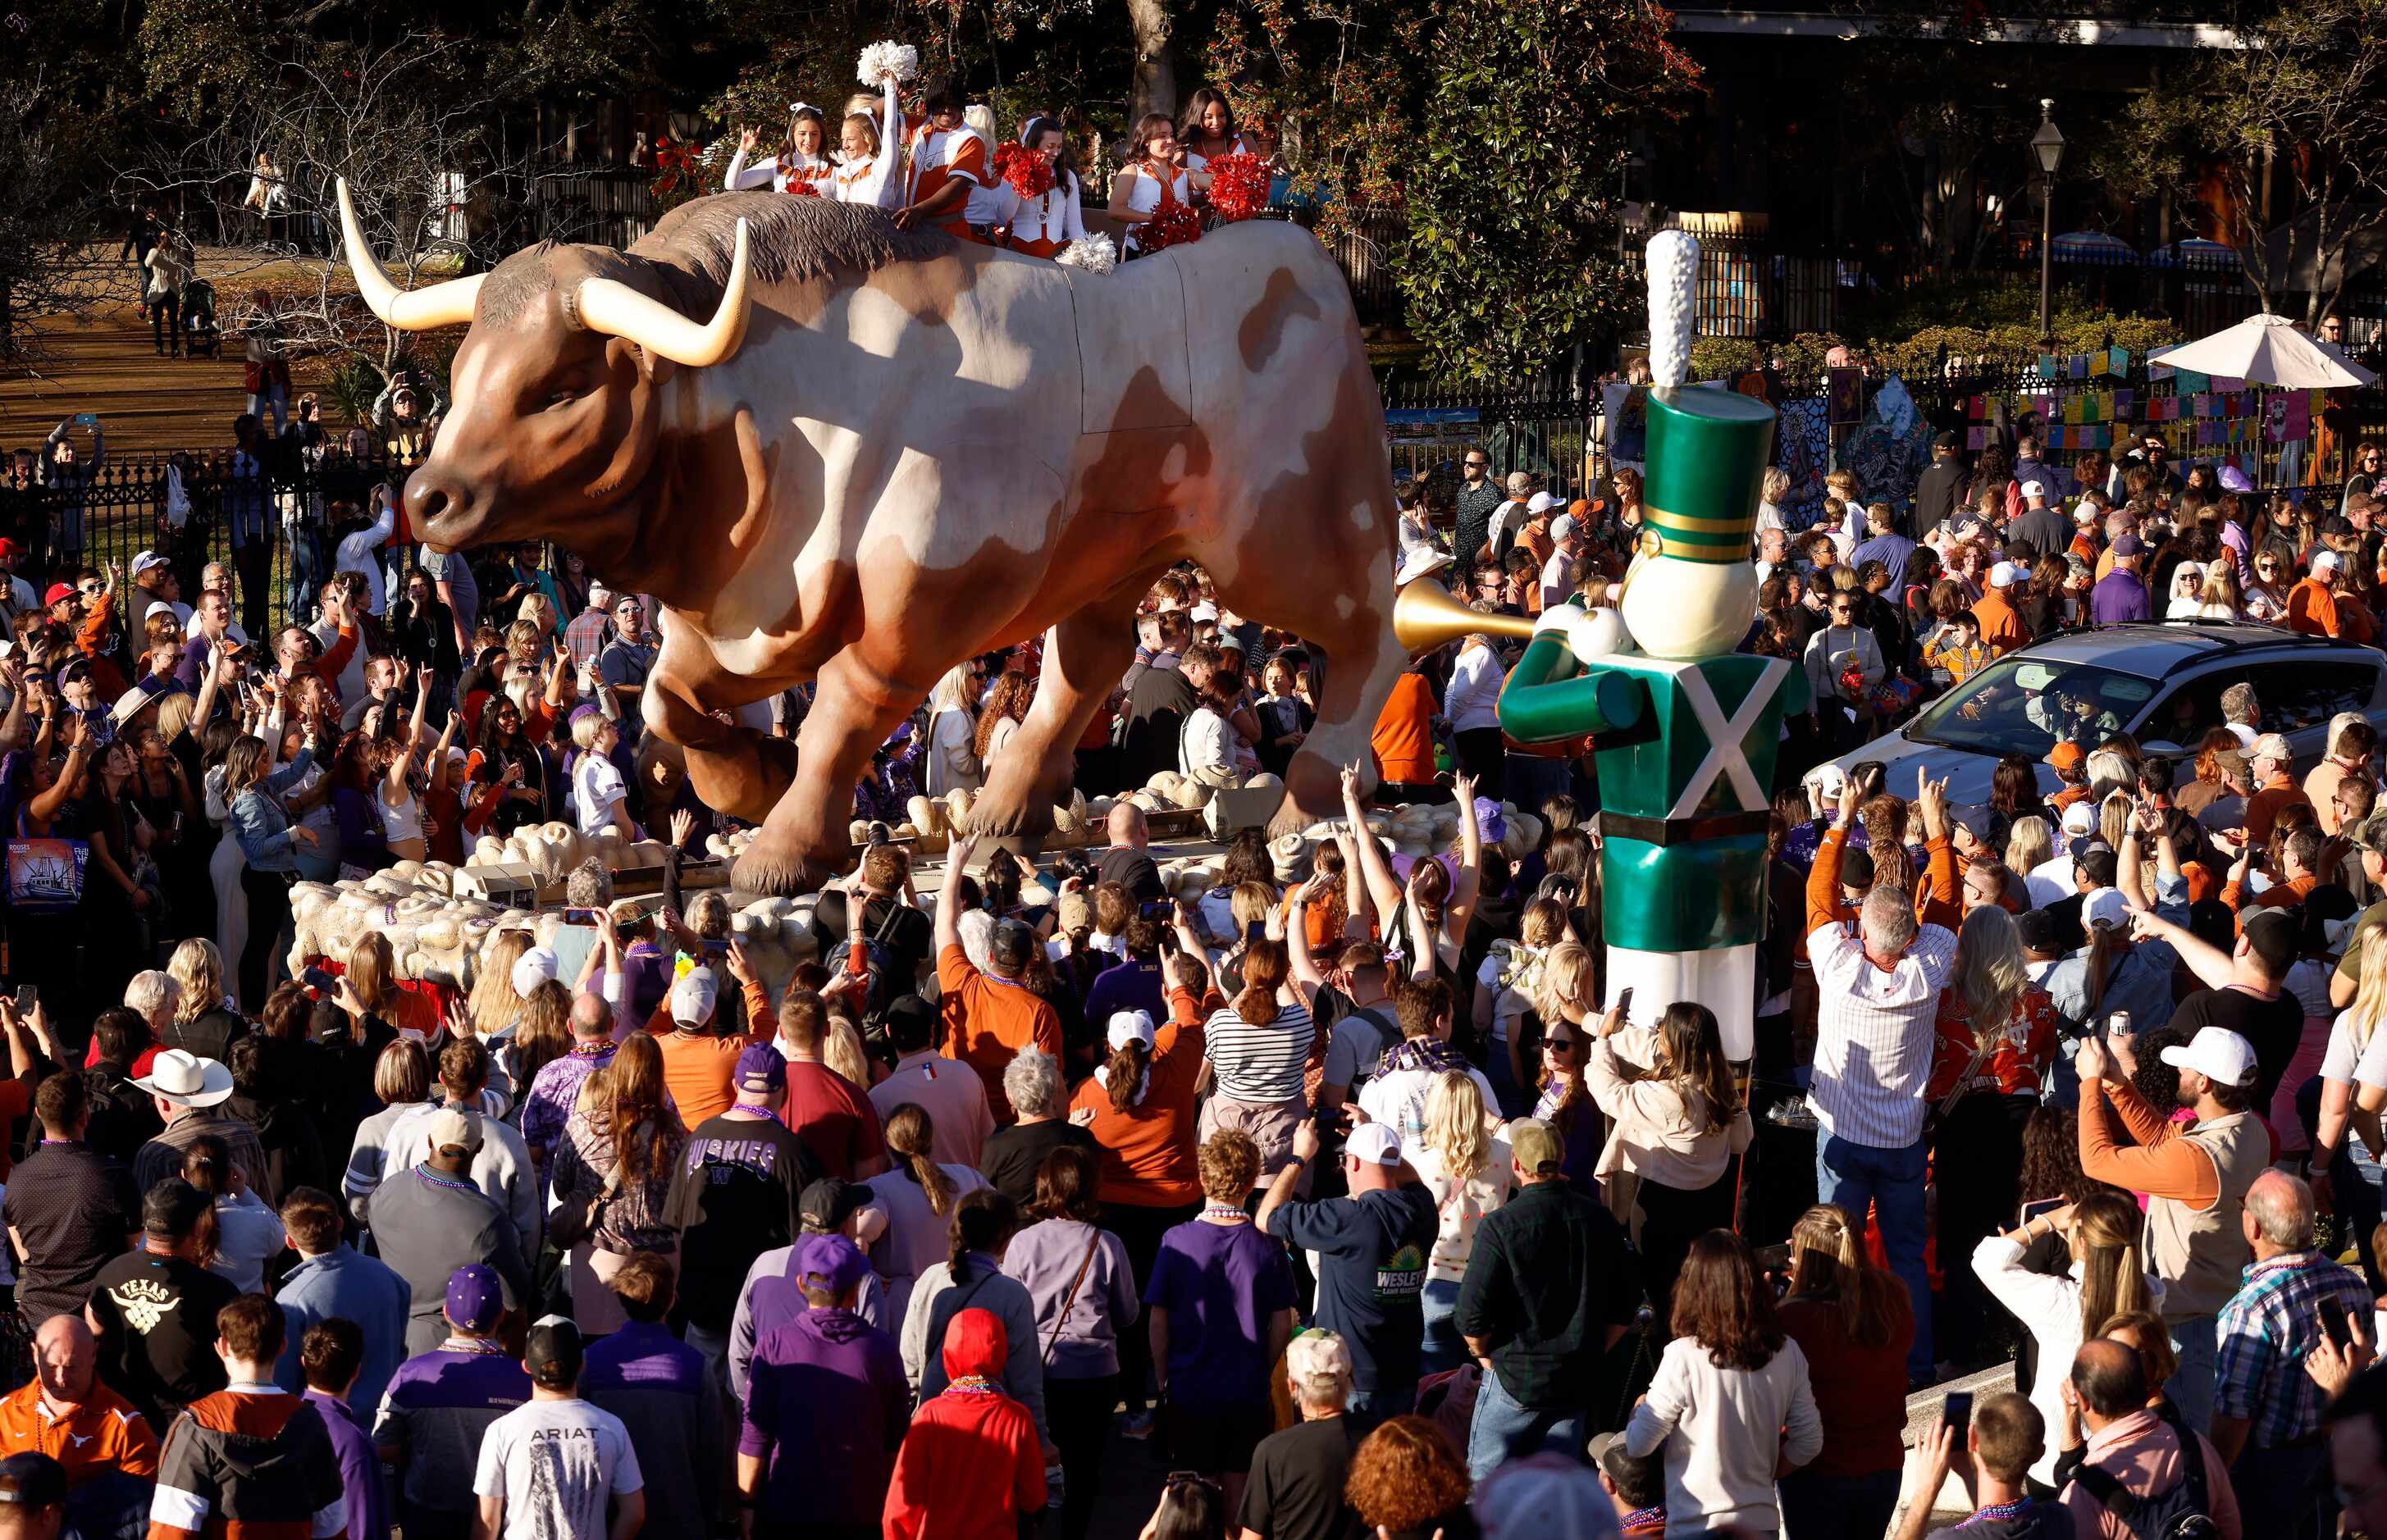 Texas Longhorns cheerleaders ride atop a large longhorn float during the Mardi Gras-style...